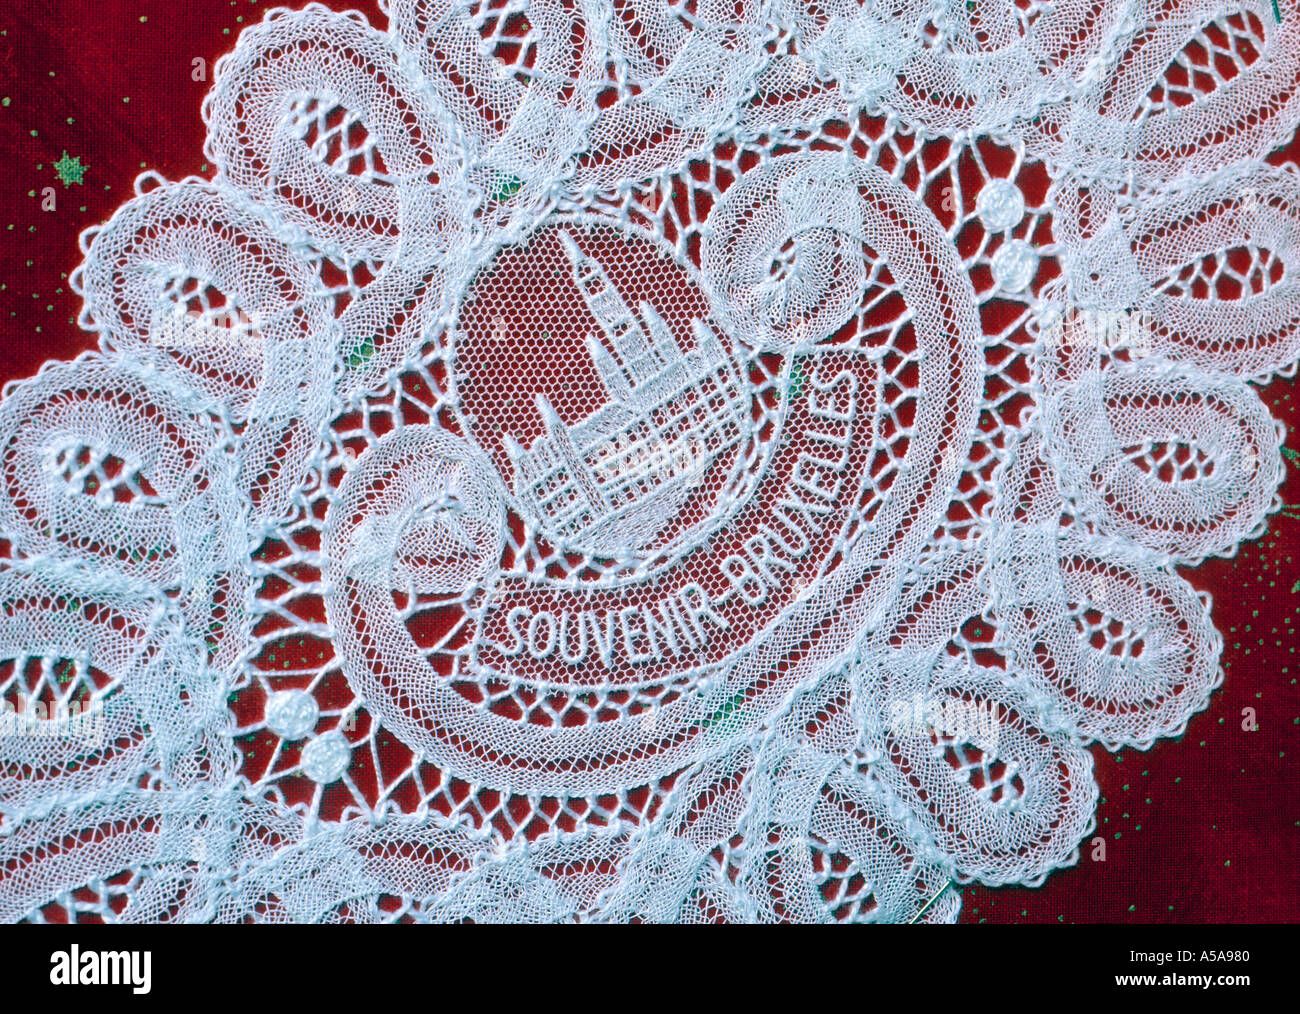 Lace product, Brussels, Belgium Stock Photo